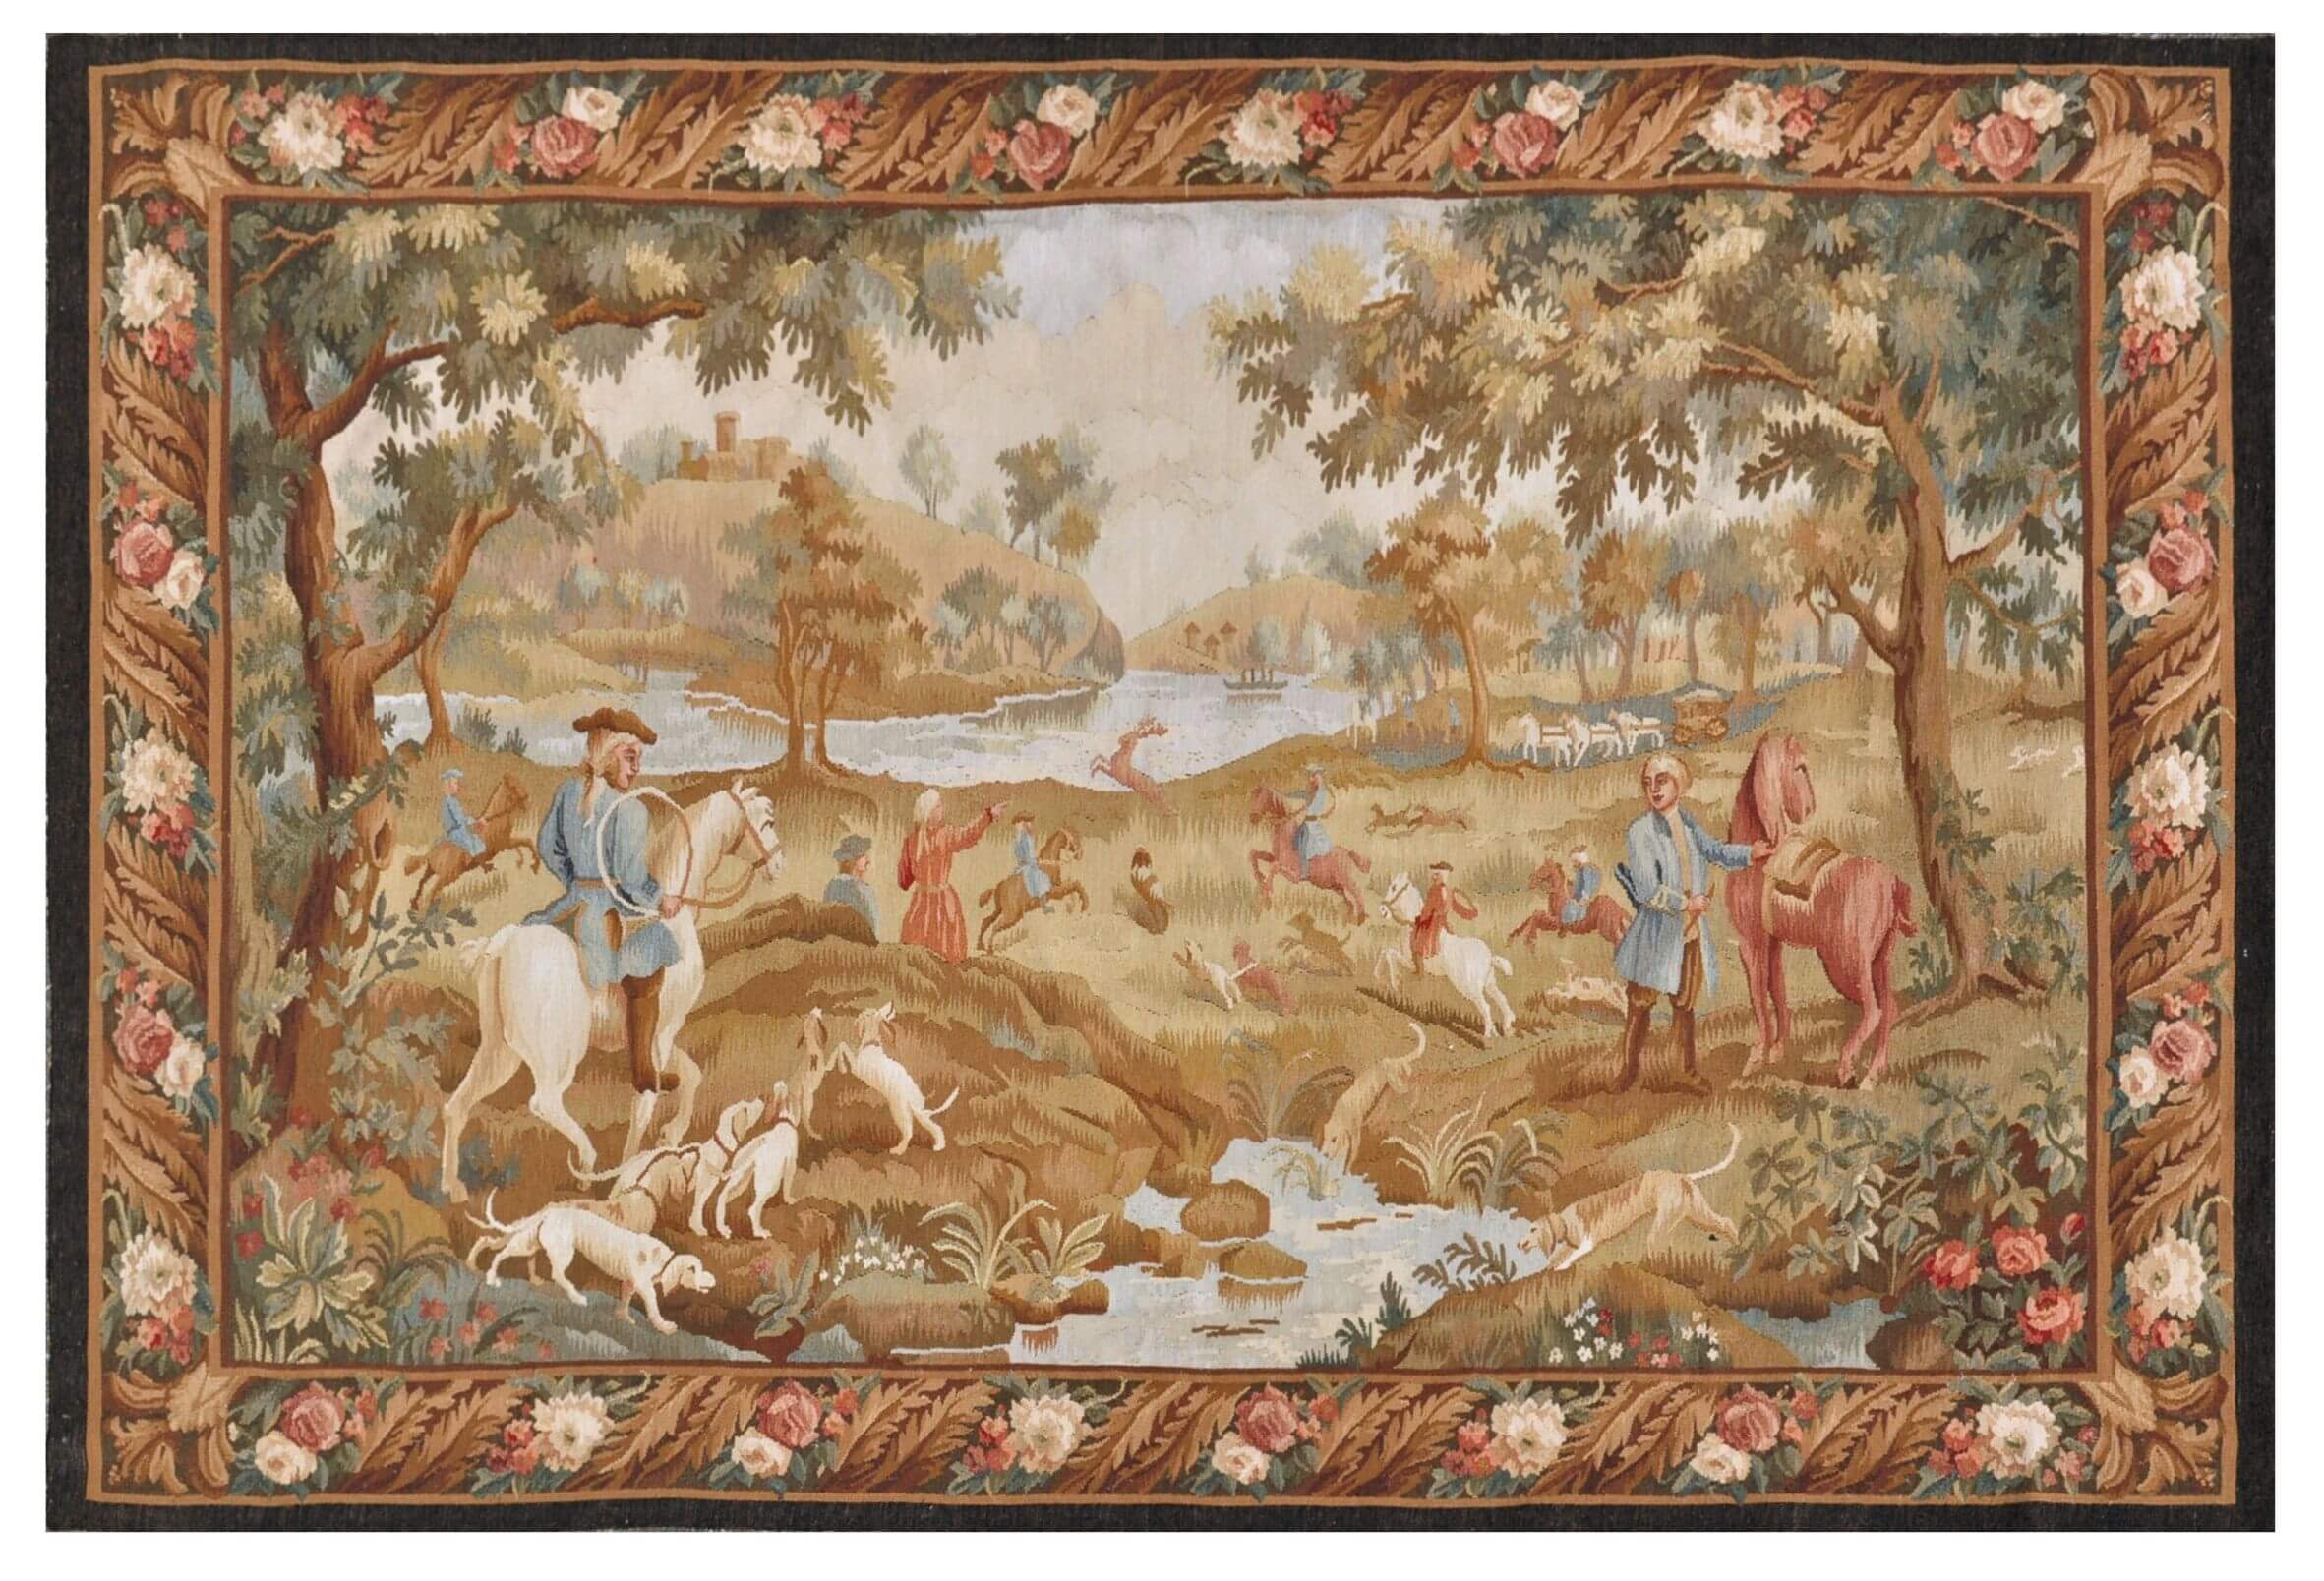 Hand Woven Hunting Scene Wall Tapestry Hand Woven Hunting Scene Wall Tapestry